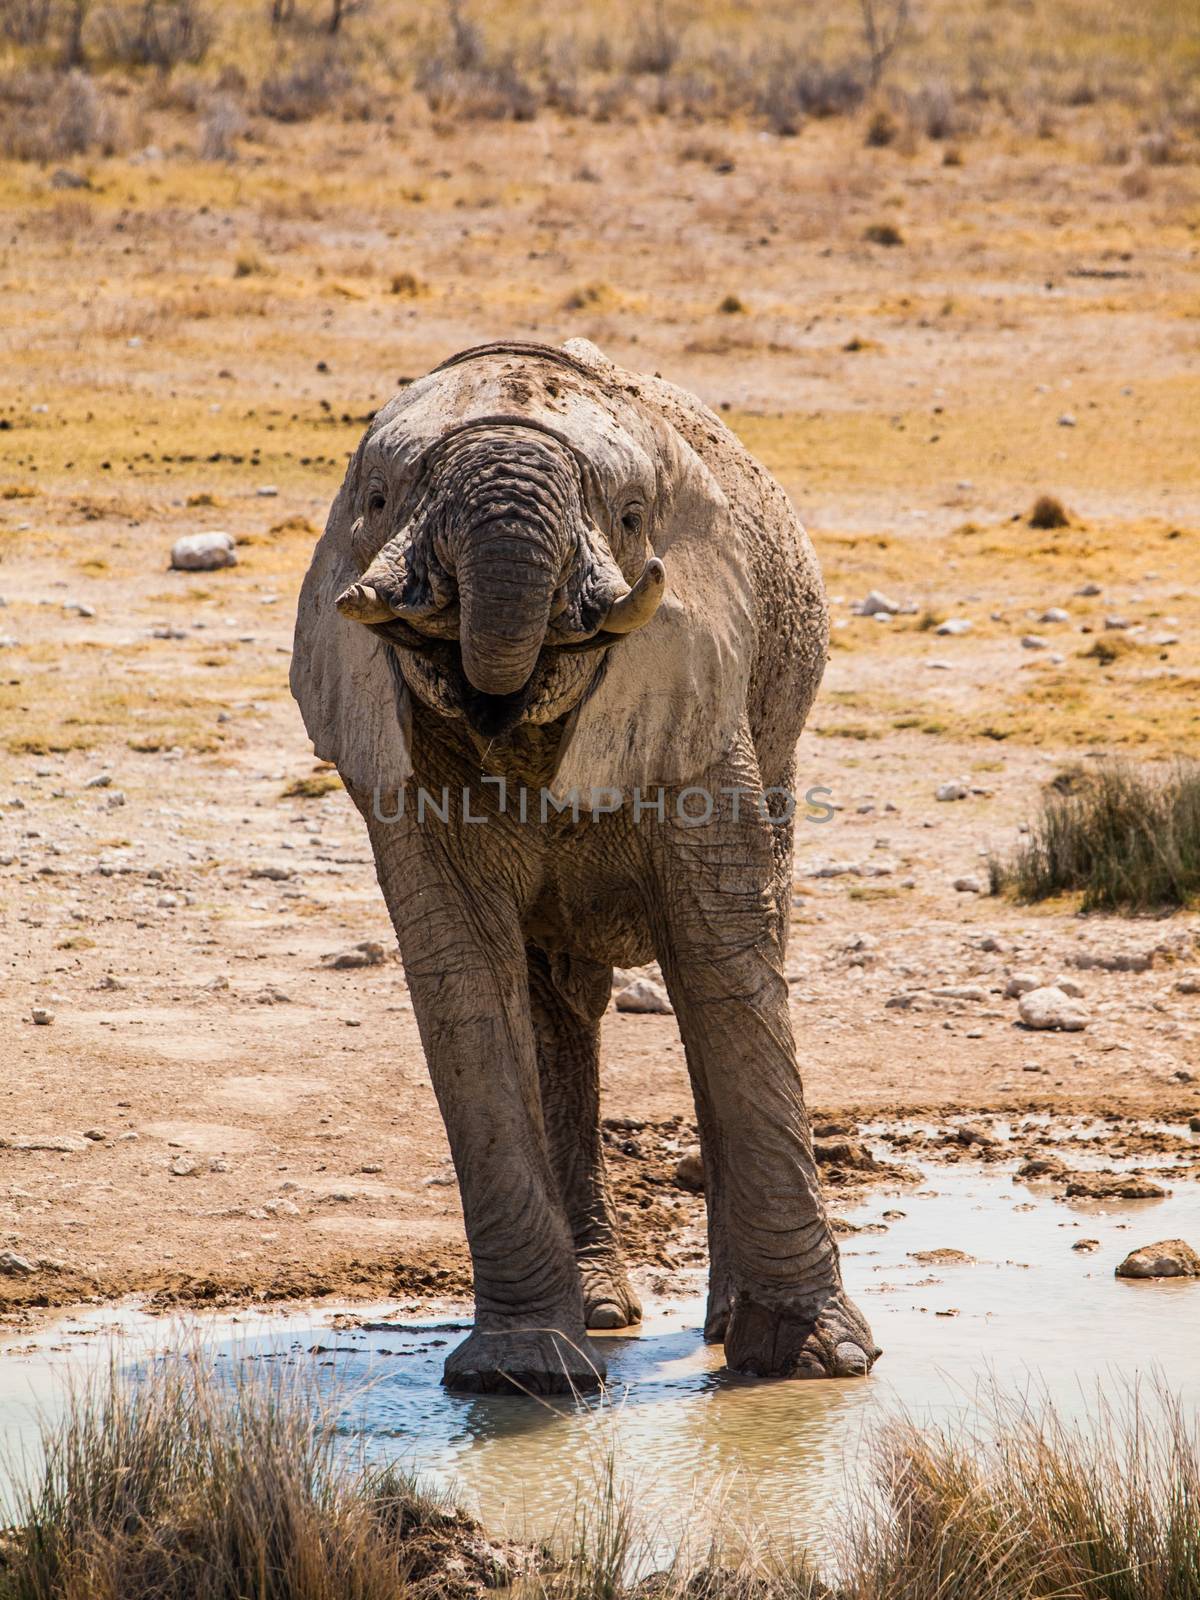 Thirsty elephant at water hole